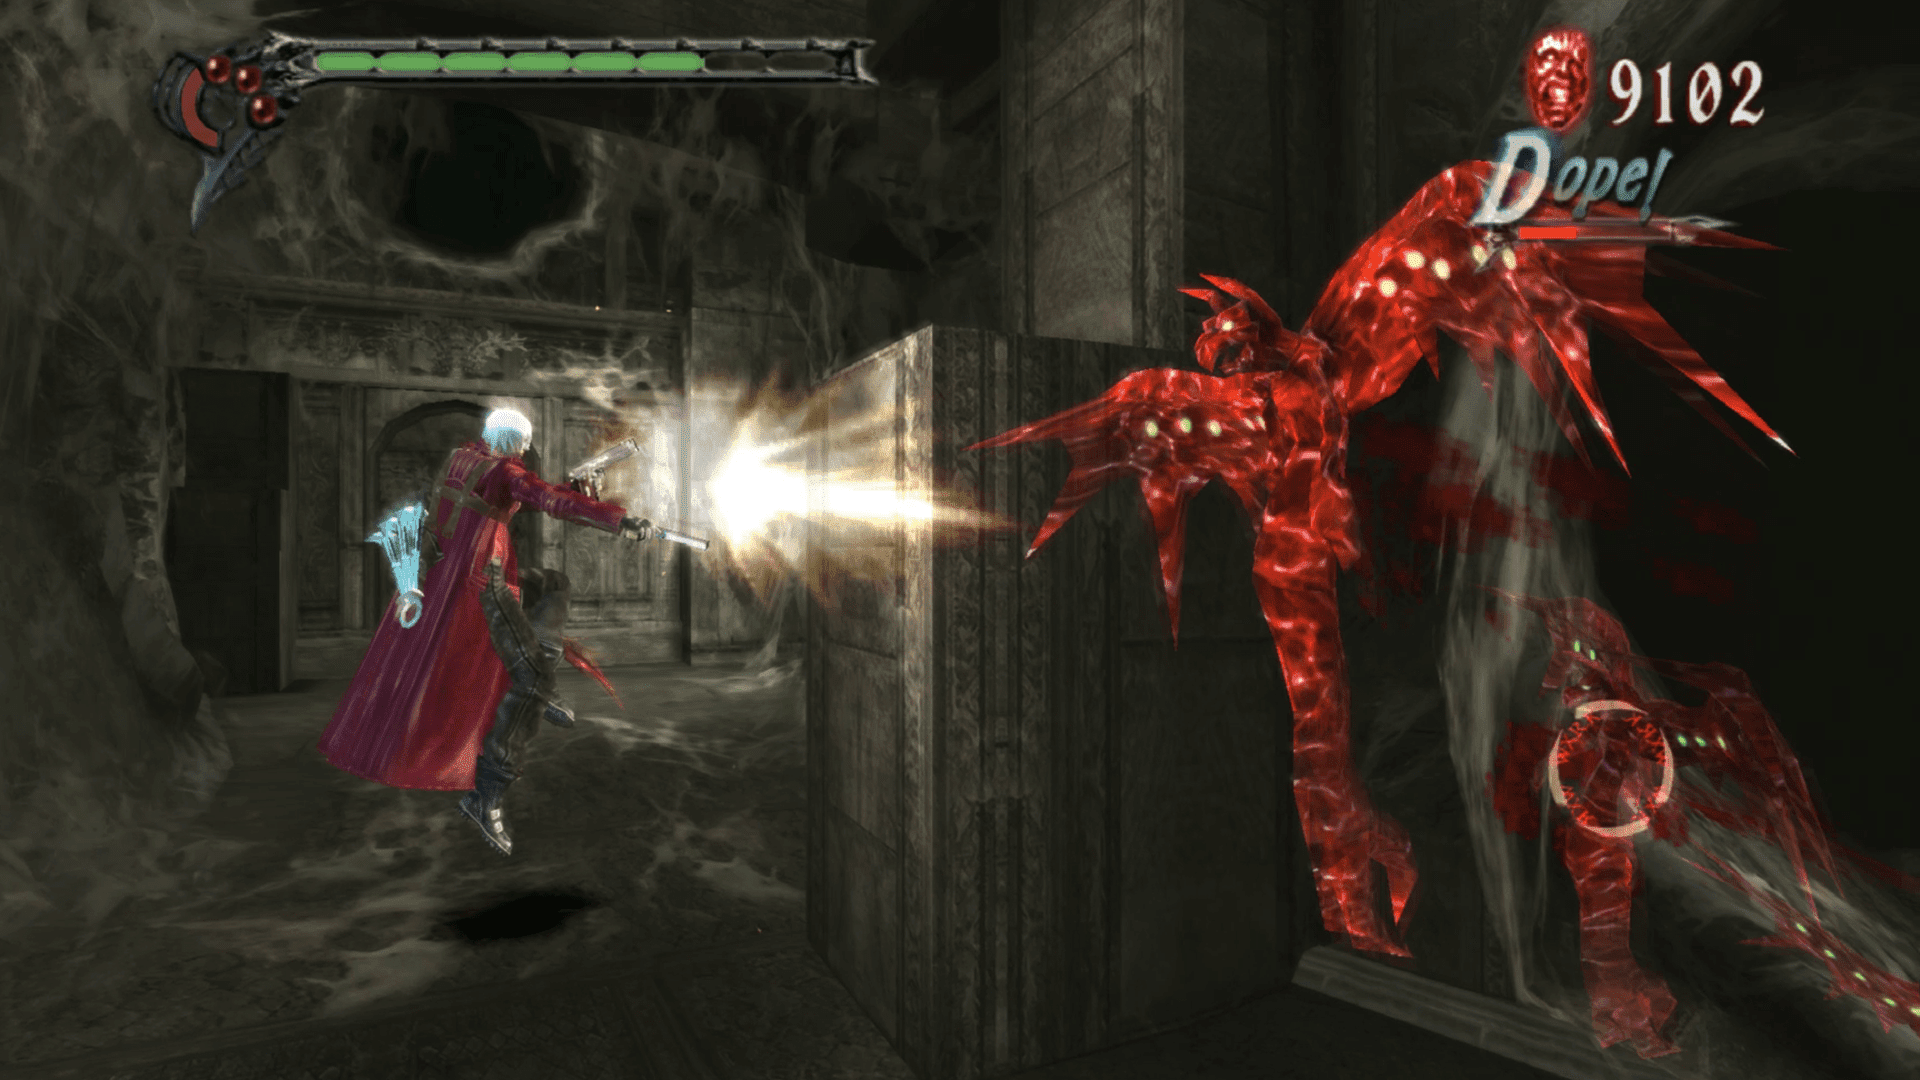 devil may cry hd collection steam